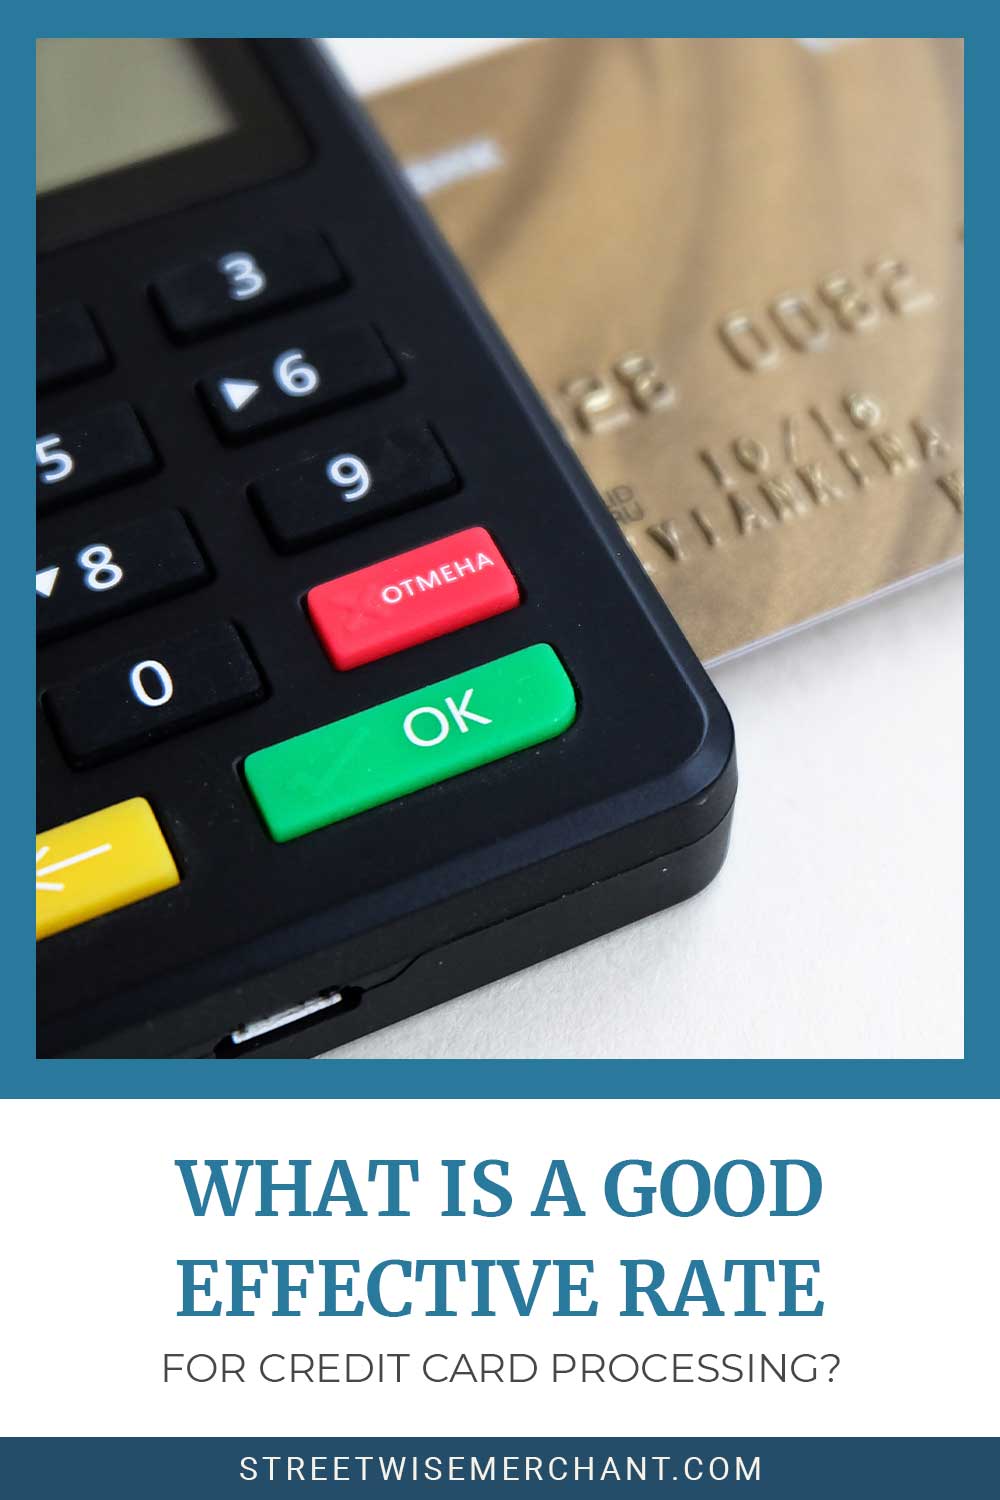 What is a Good Effective Rate for Credit Card Processing?